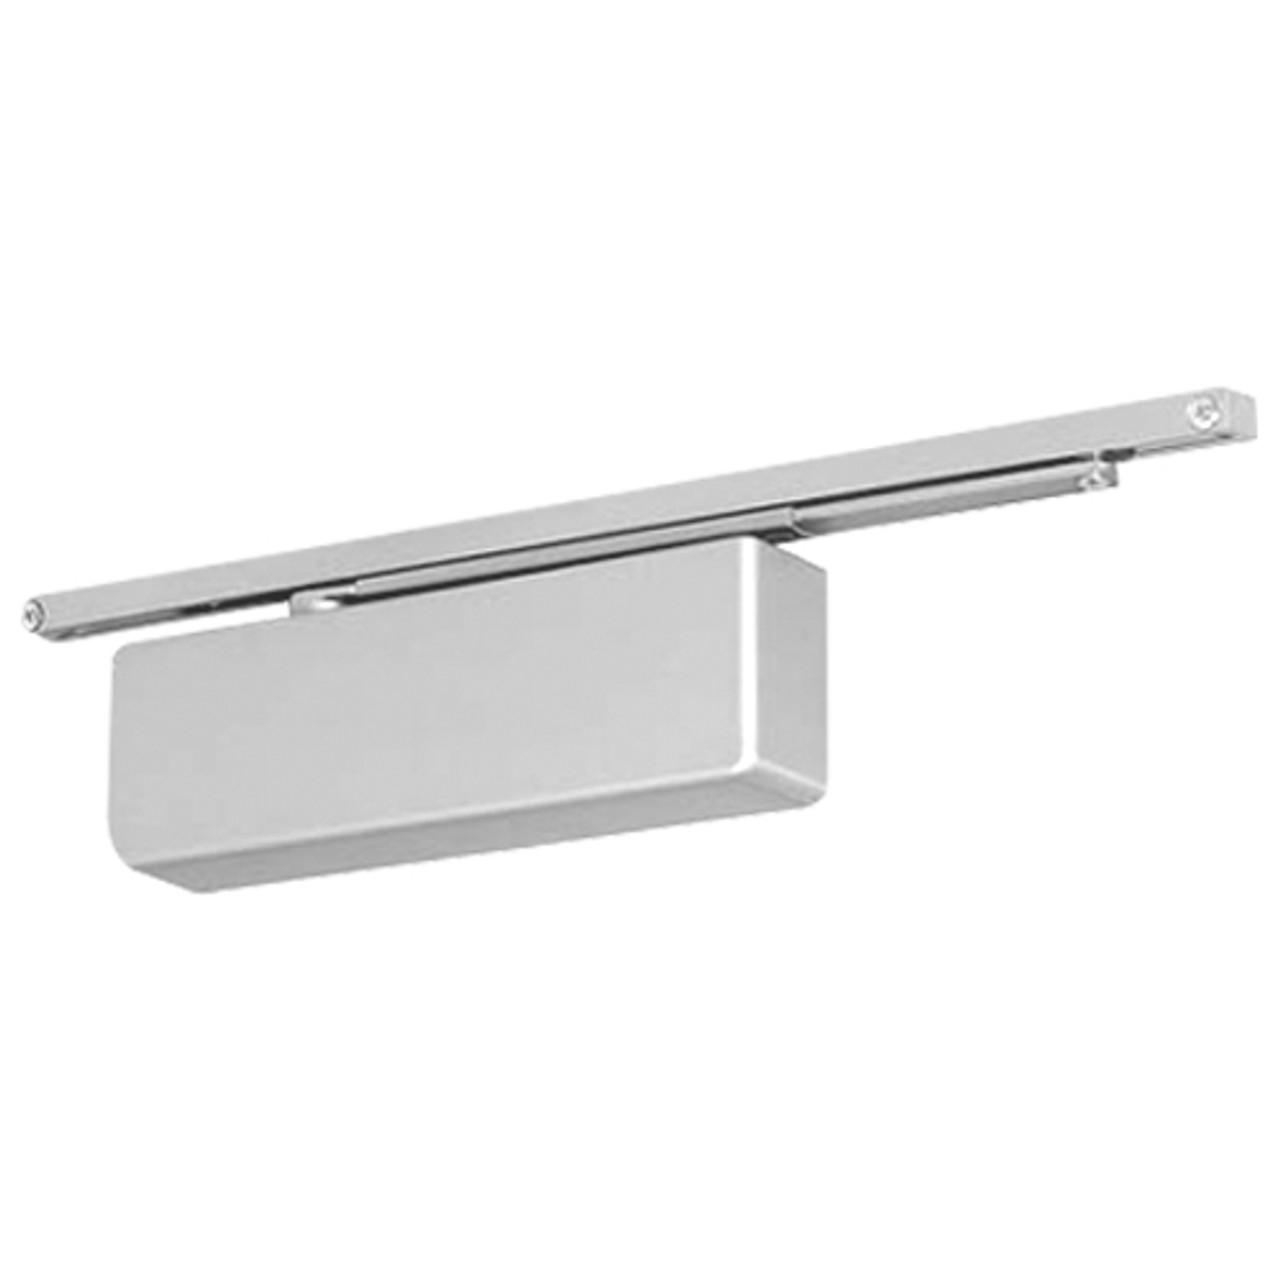 4450ST-689 Yale 4400 Series Institutional Door Closer with Pull Side Low Profile Slide Track Arm in Aluminum Painted